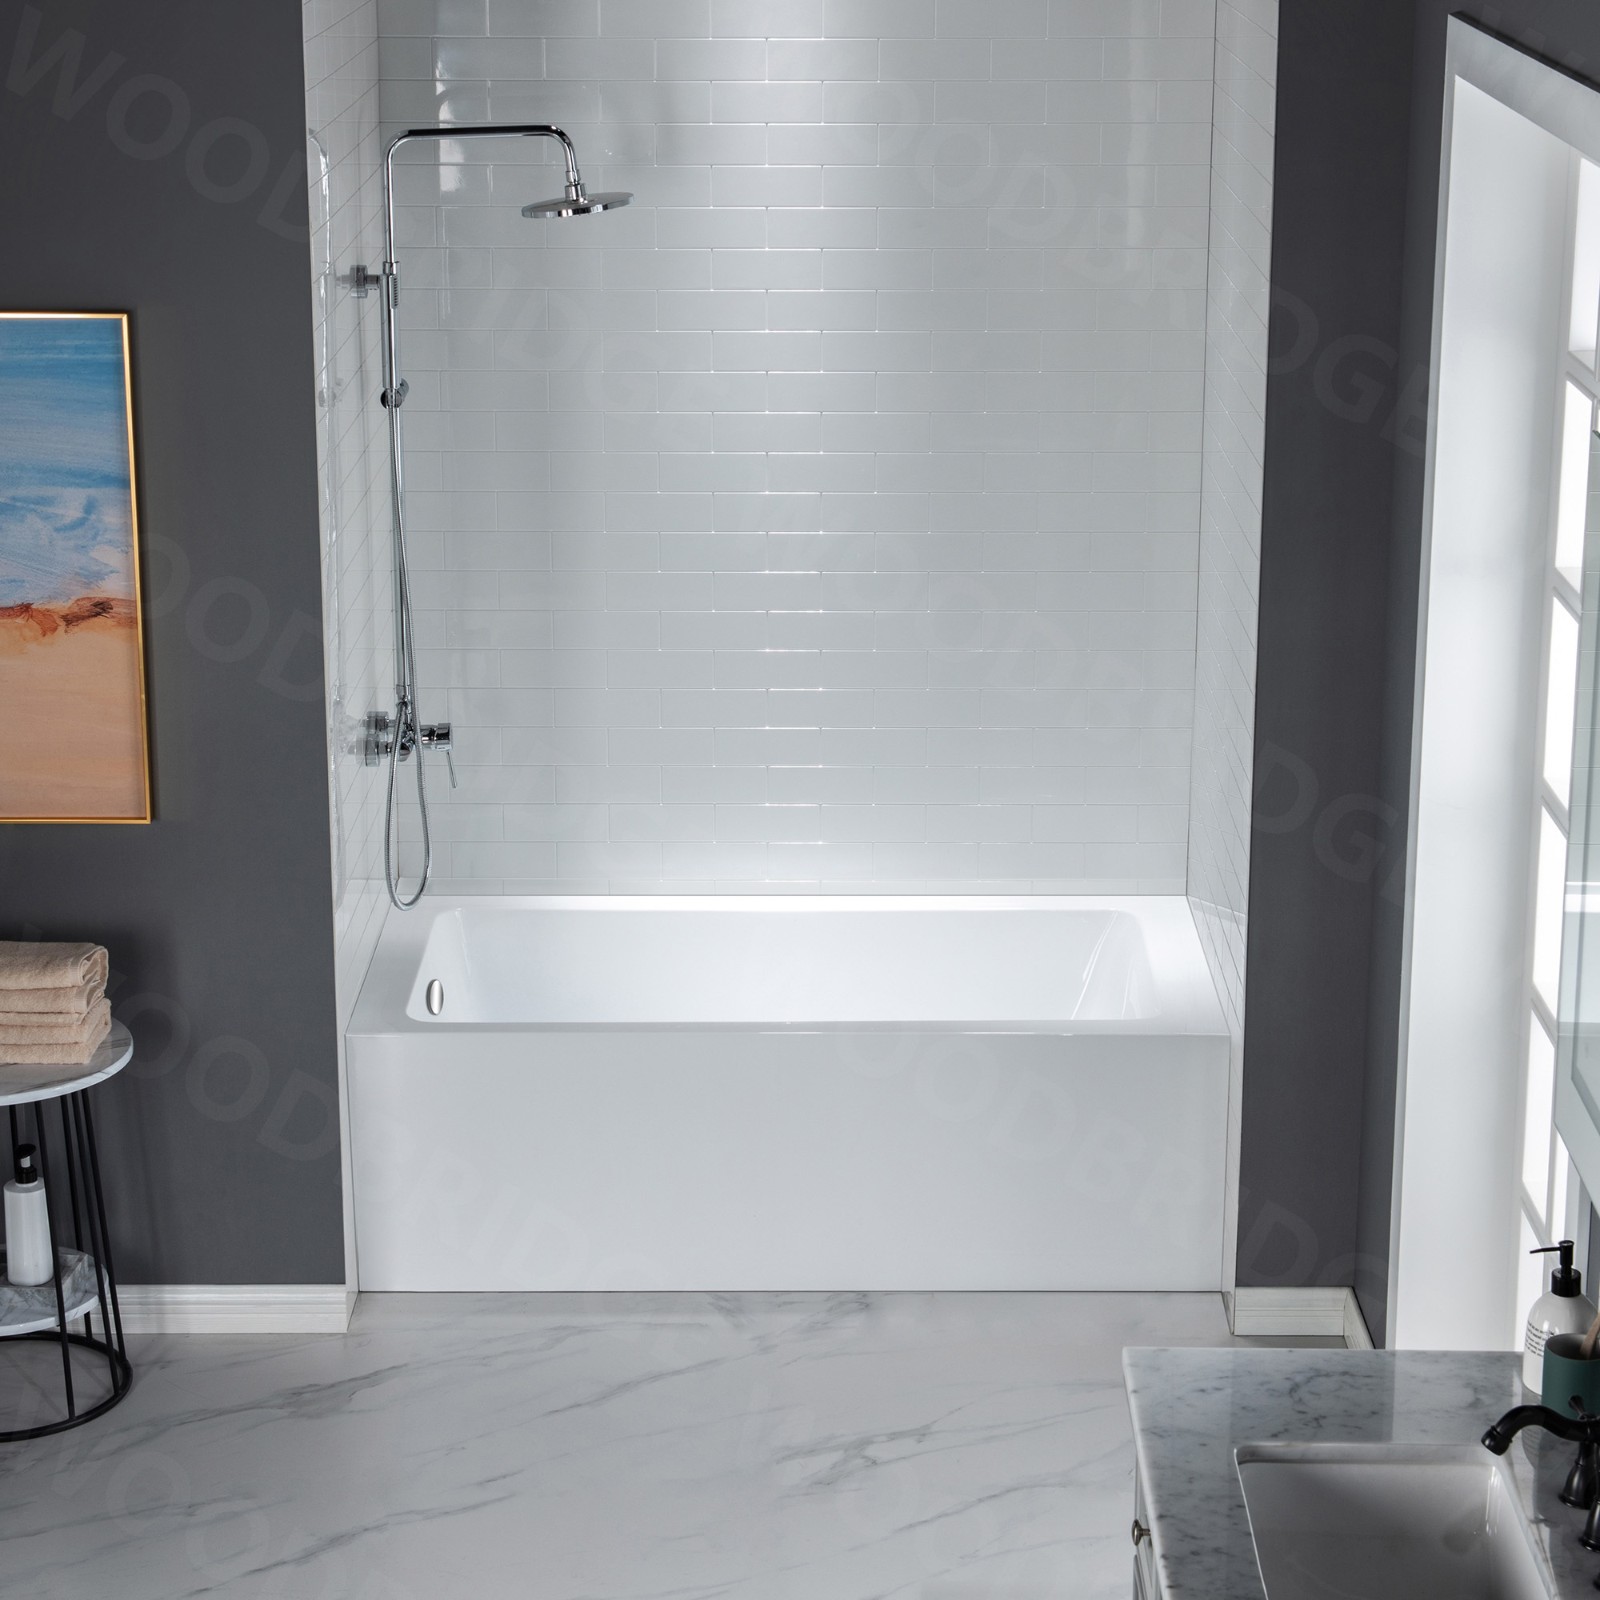  WOODBRIDGE 60-Inch Contemporary Alcove Acrylic Bathtub with Left Hand Drain and Overflow Holes, White_9213